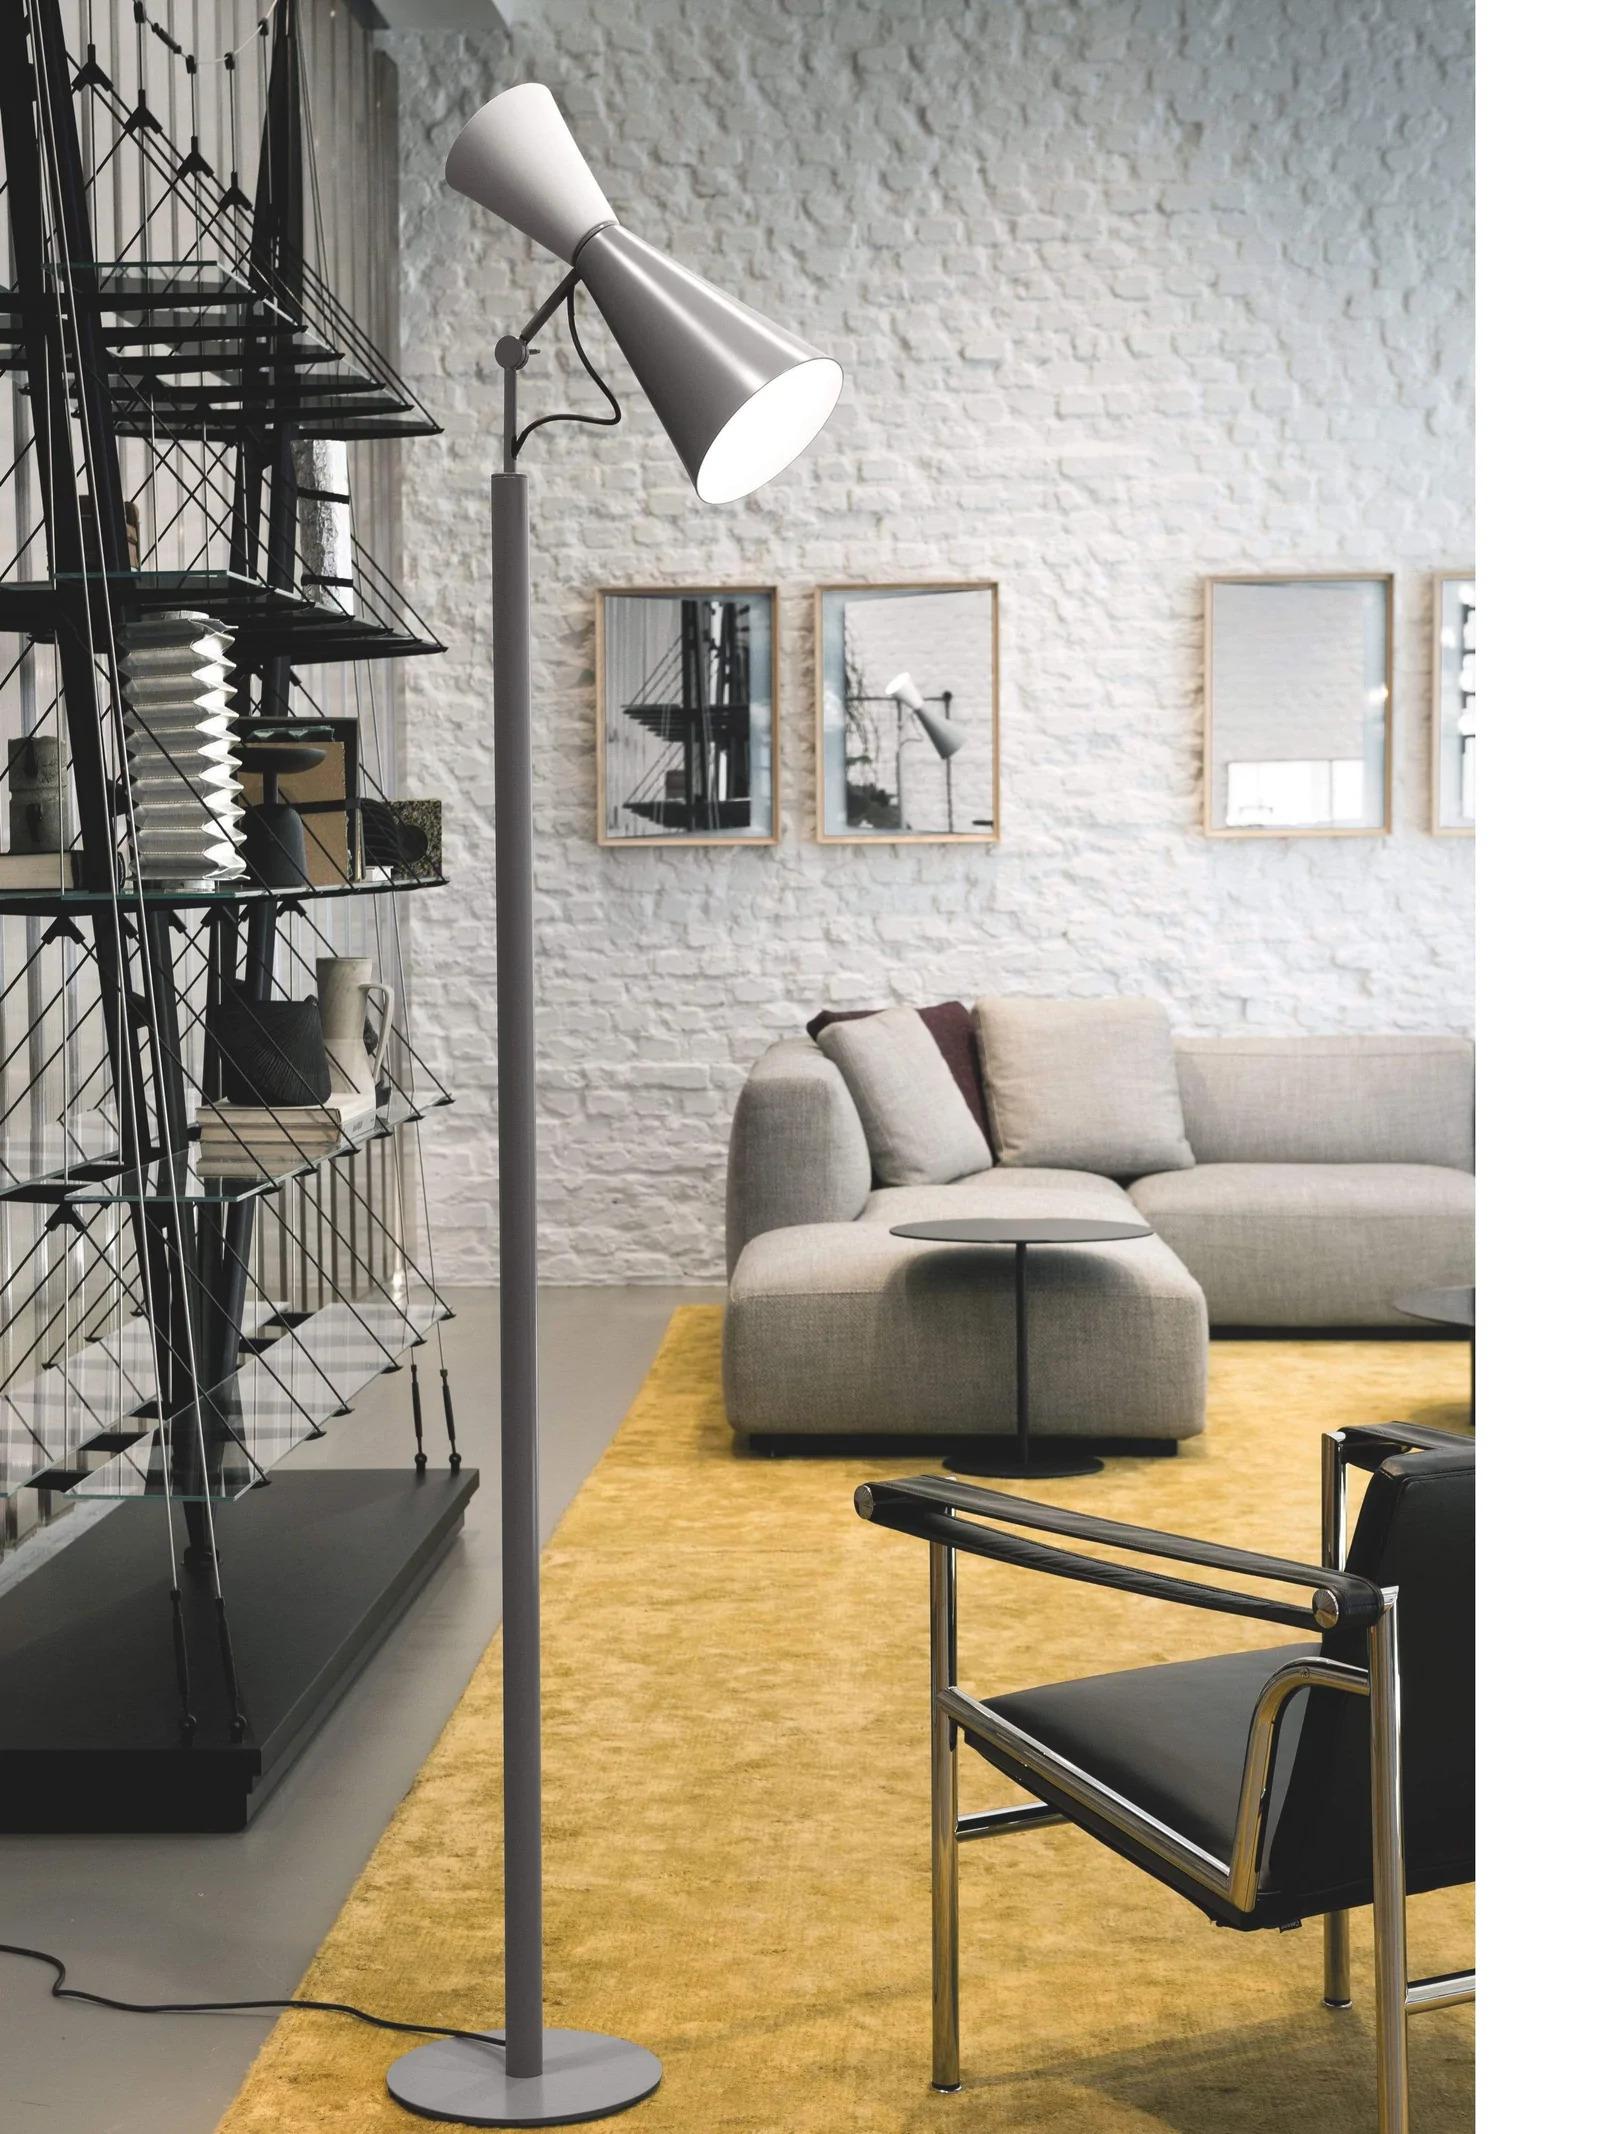 Designed for his masterful Chandigarh Parliament building, Le Corbusier‚ Parliament floor lamp is both elegant and functional. It is adjustable in height and features two cone shaped diffusers that swivel for direct or indirect light. This lamp